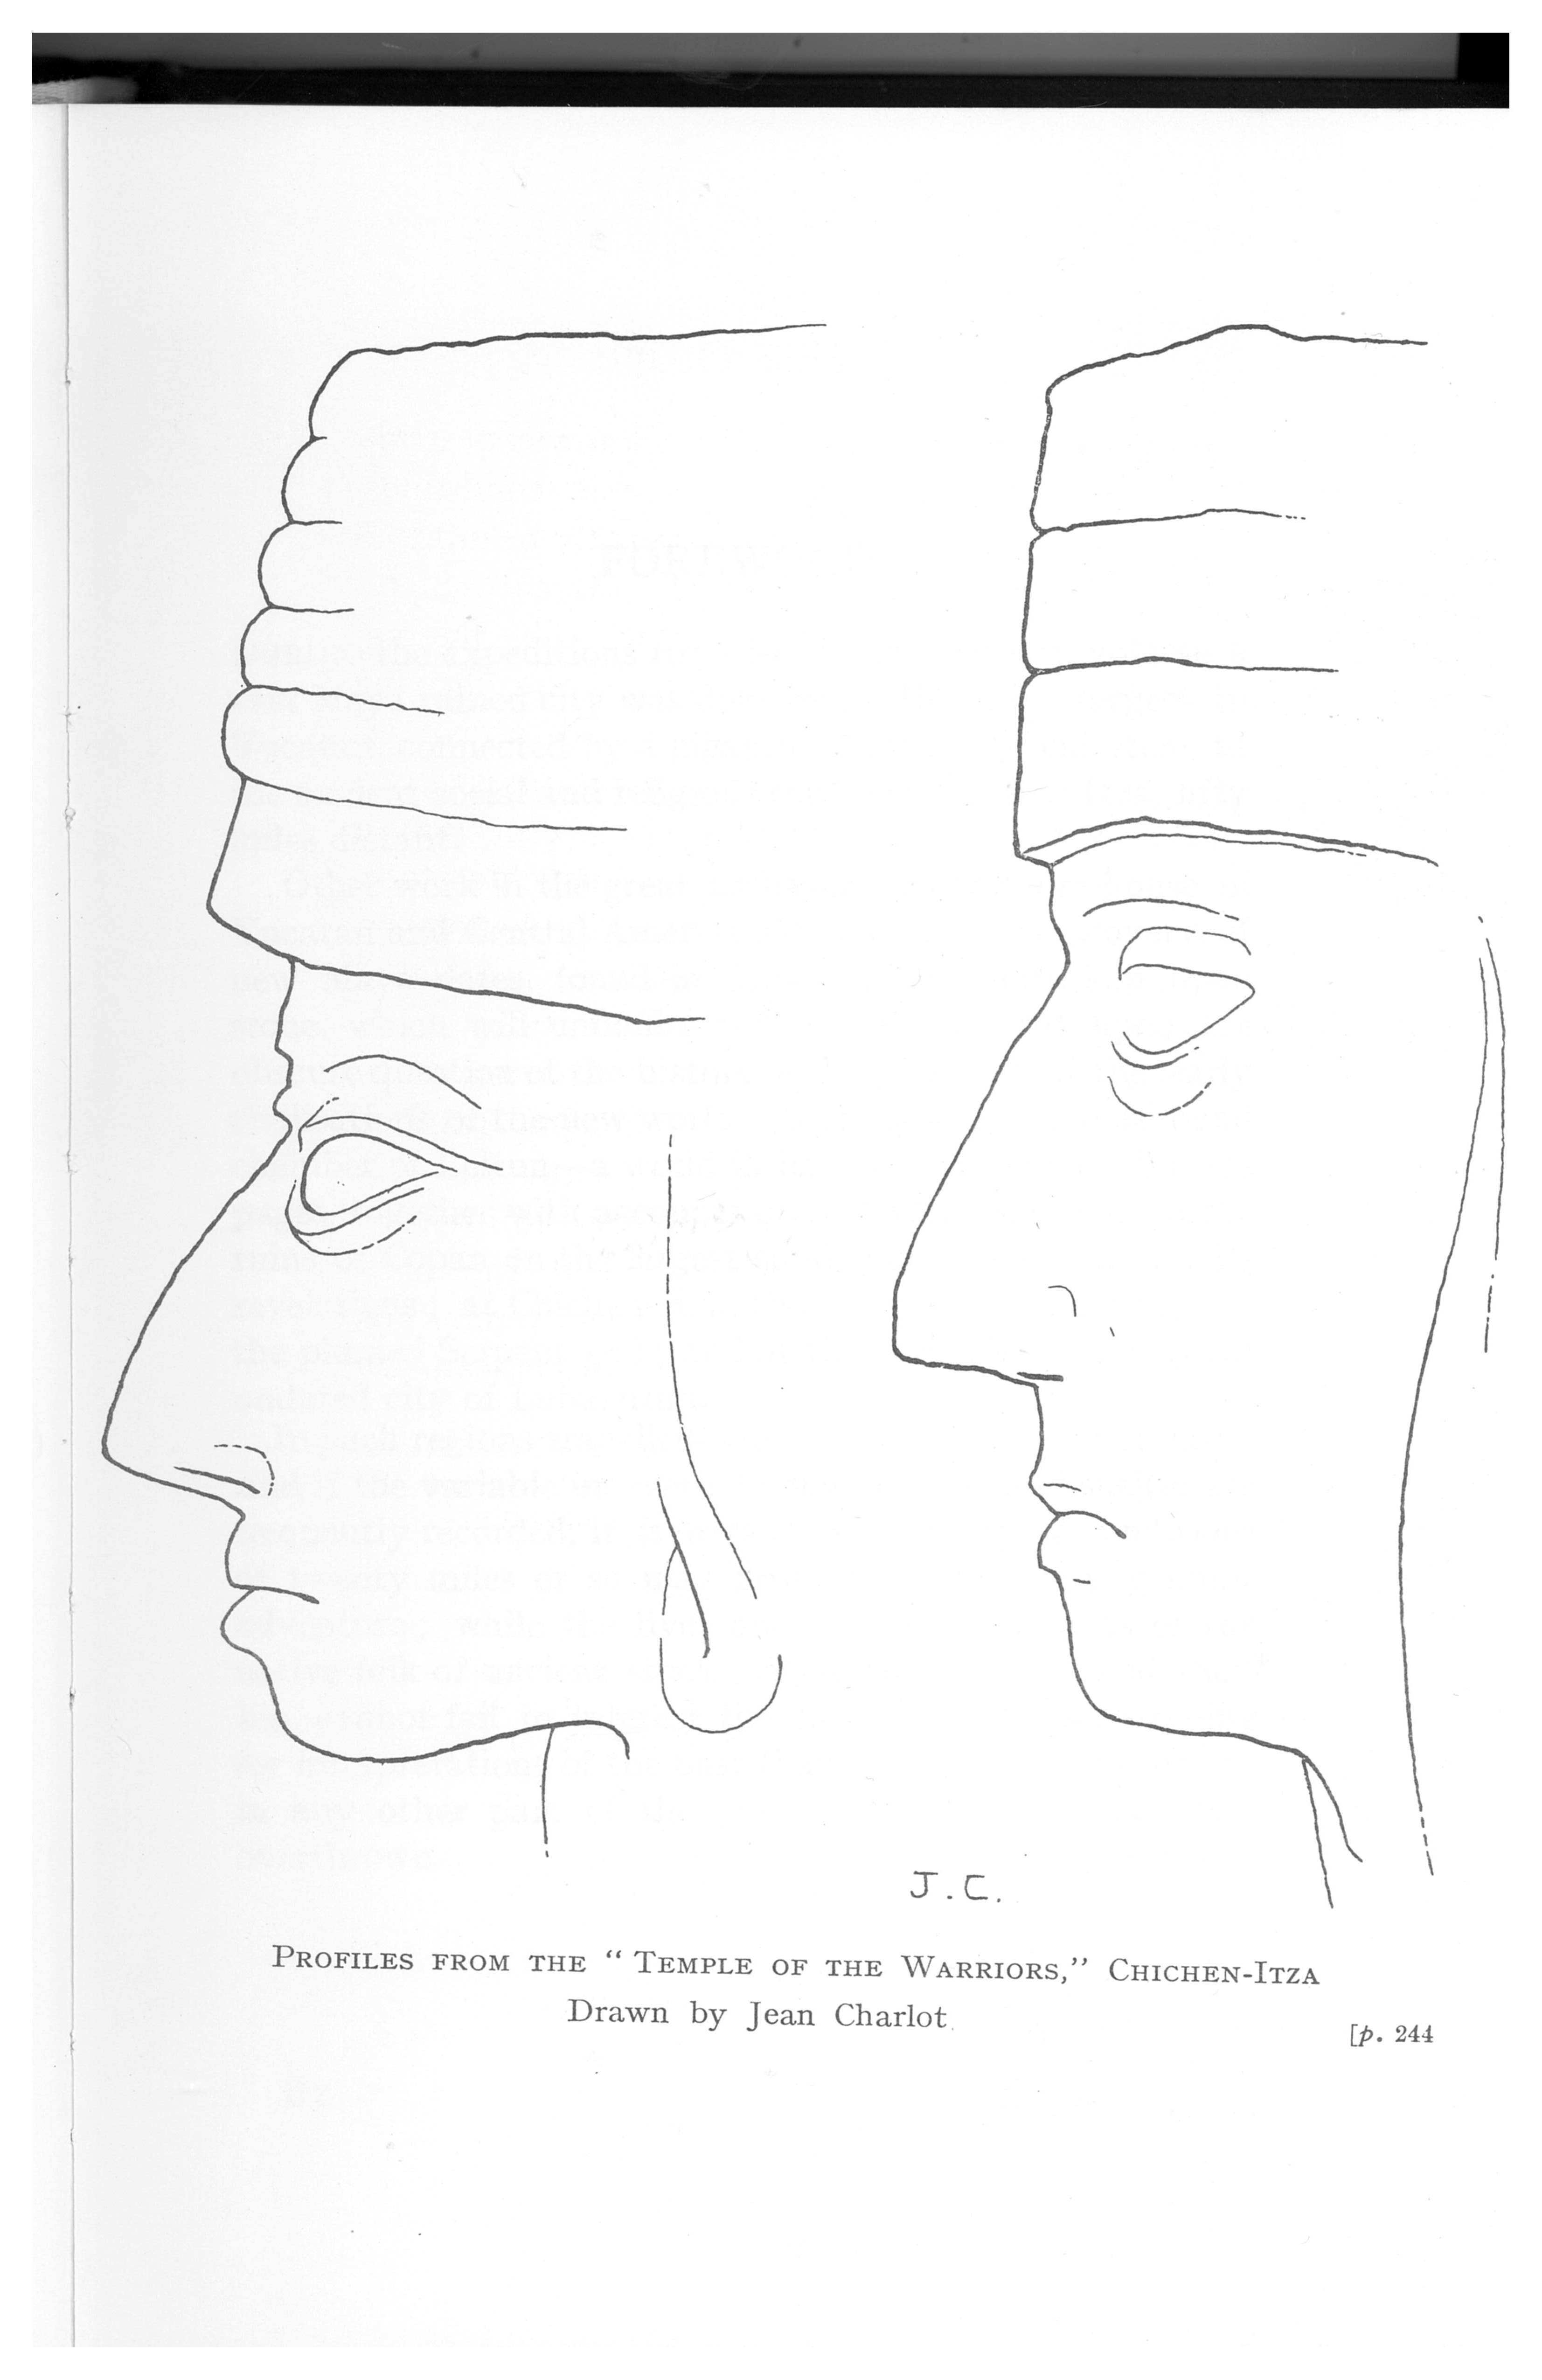 'Ancient Cities and Modern Tribes' written by Thomas Gann.  Illustration on page 244 by Jean Charlot.